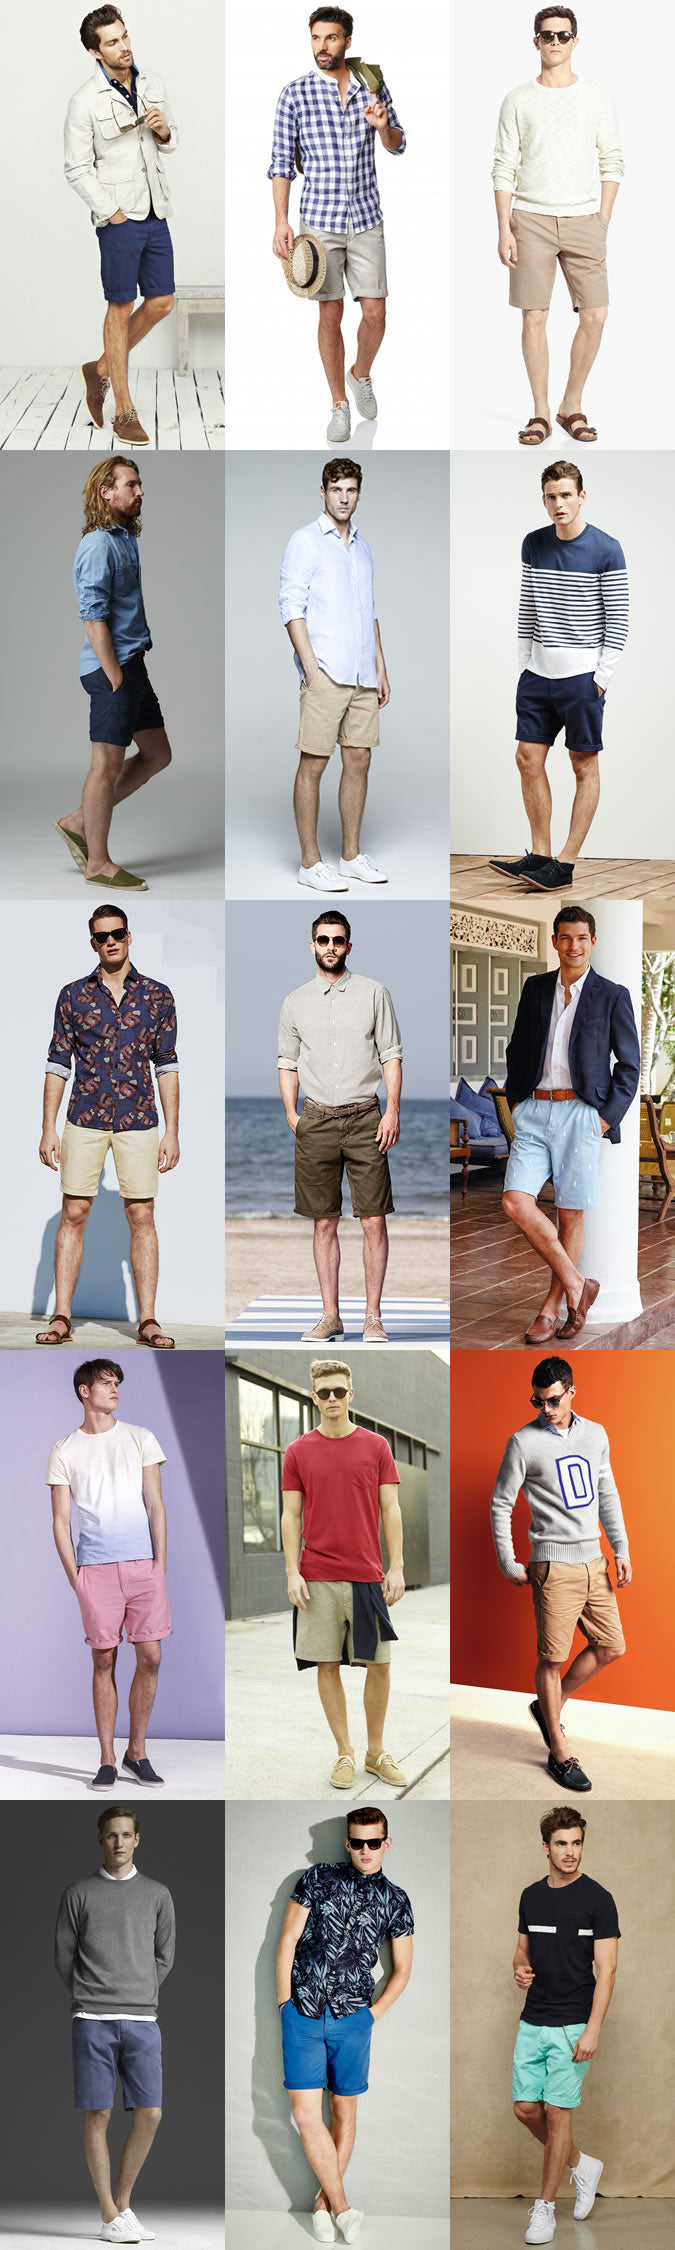 Amazing Shorts & Shoes Combinations That Work Every Time – LIFESTYLE BY PS